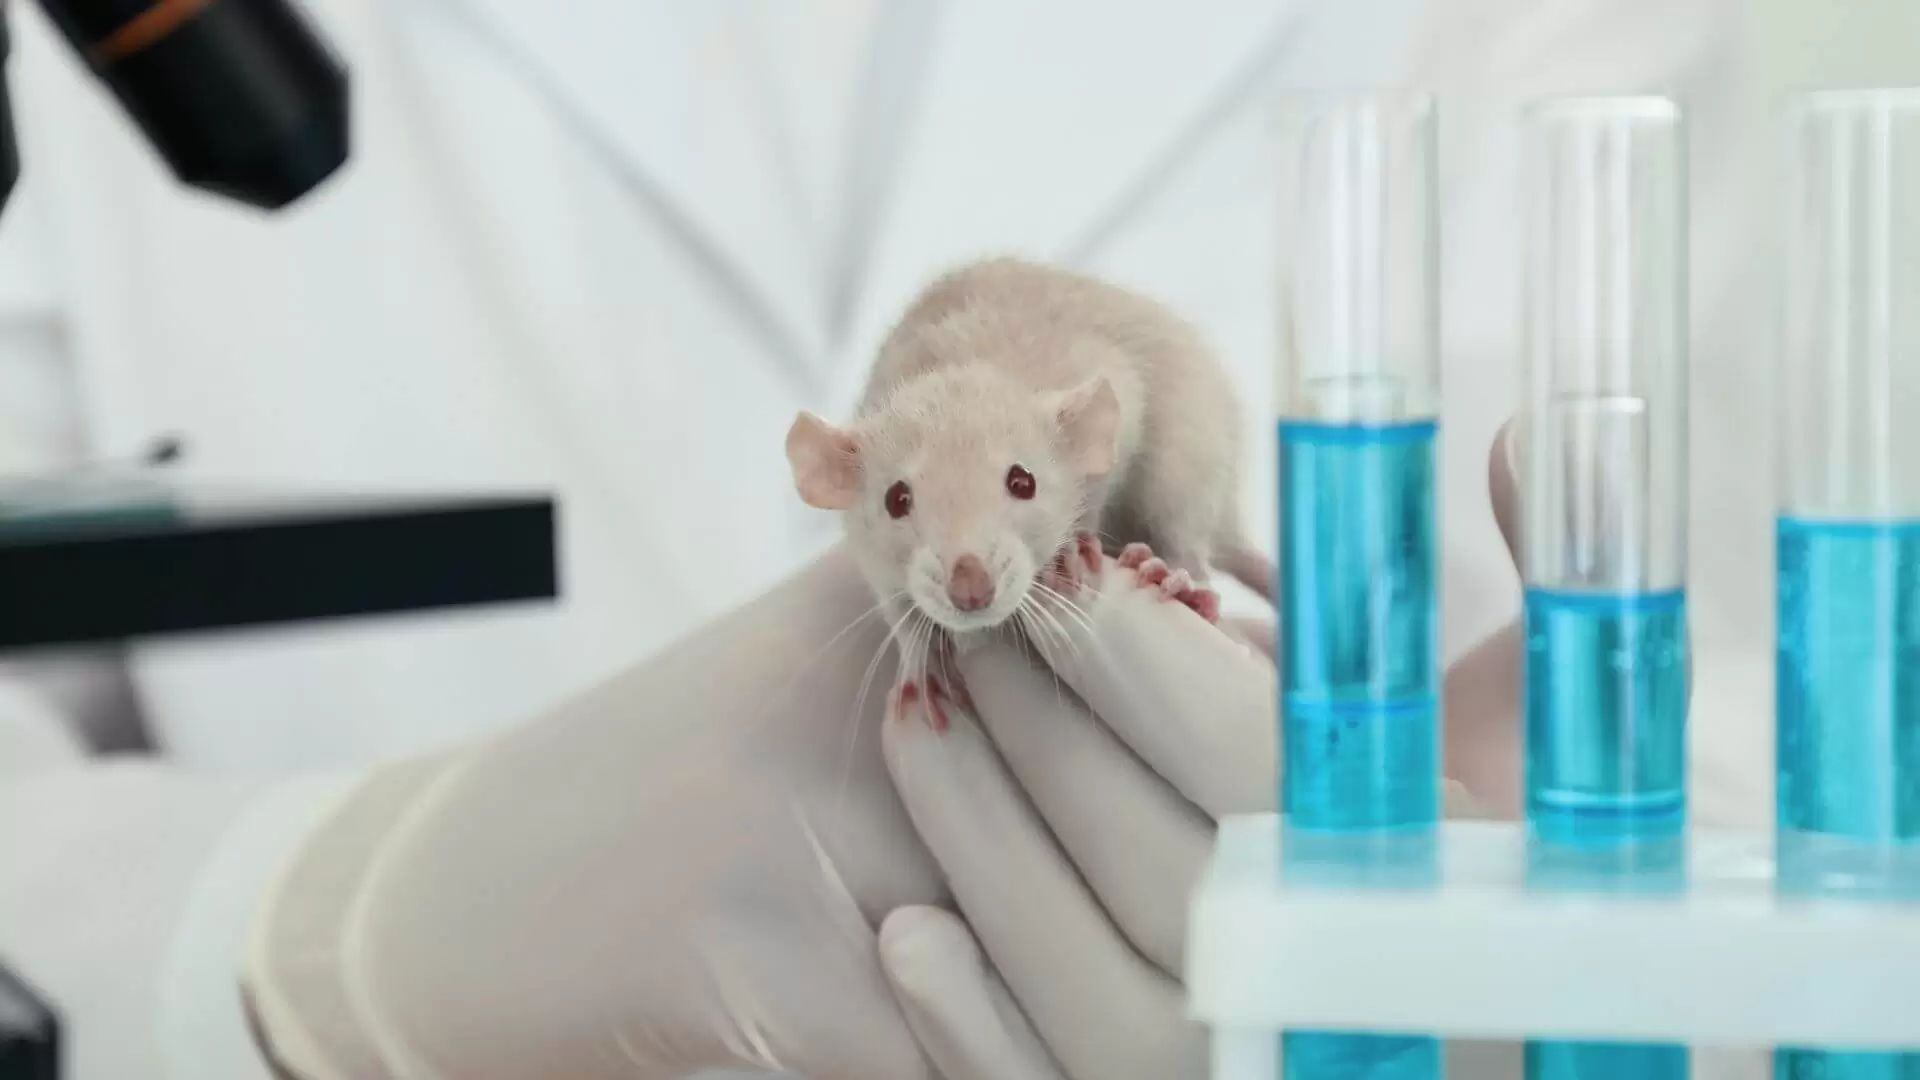 Animal Testing Labs Come out of The Dark (1)